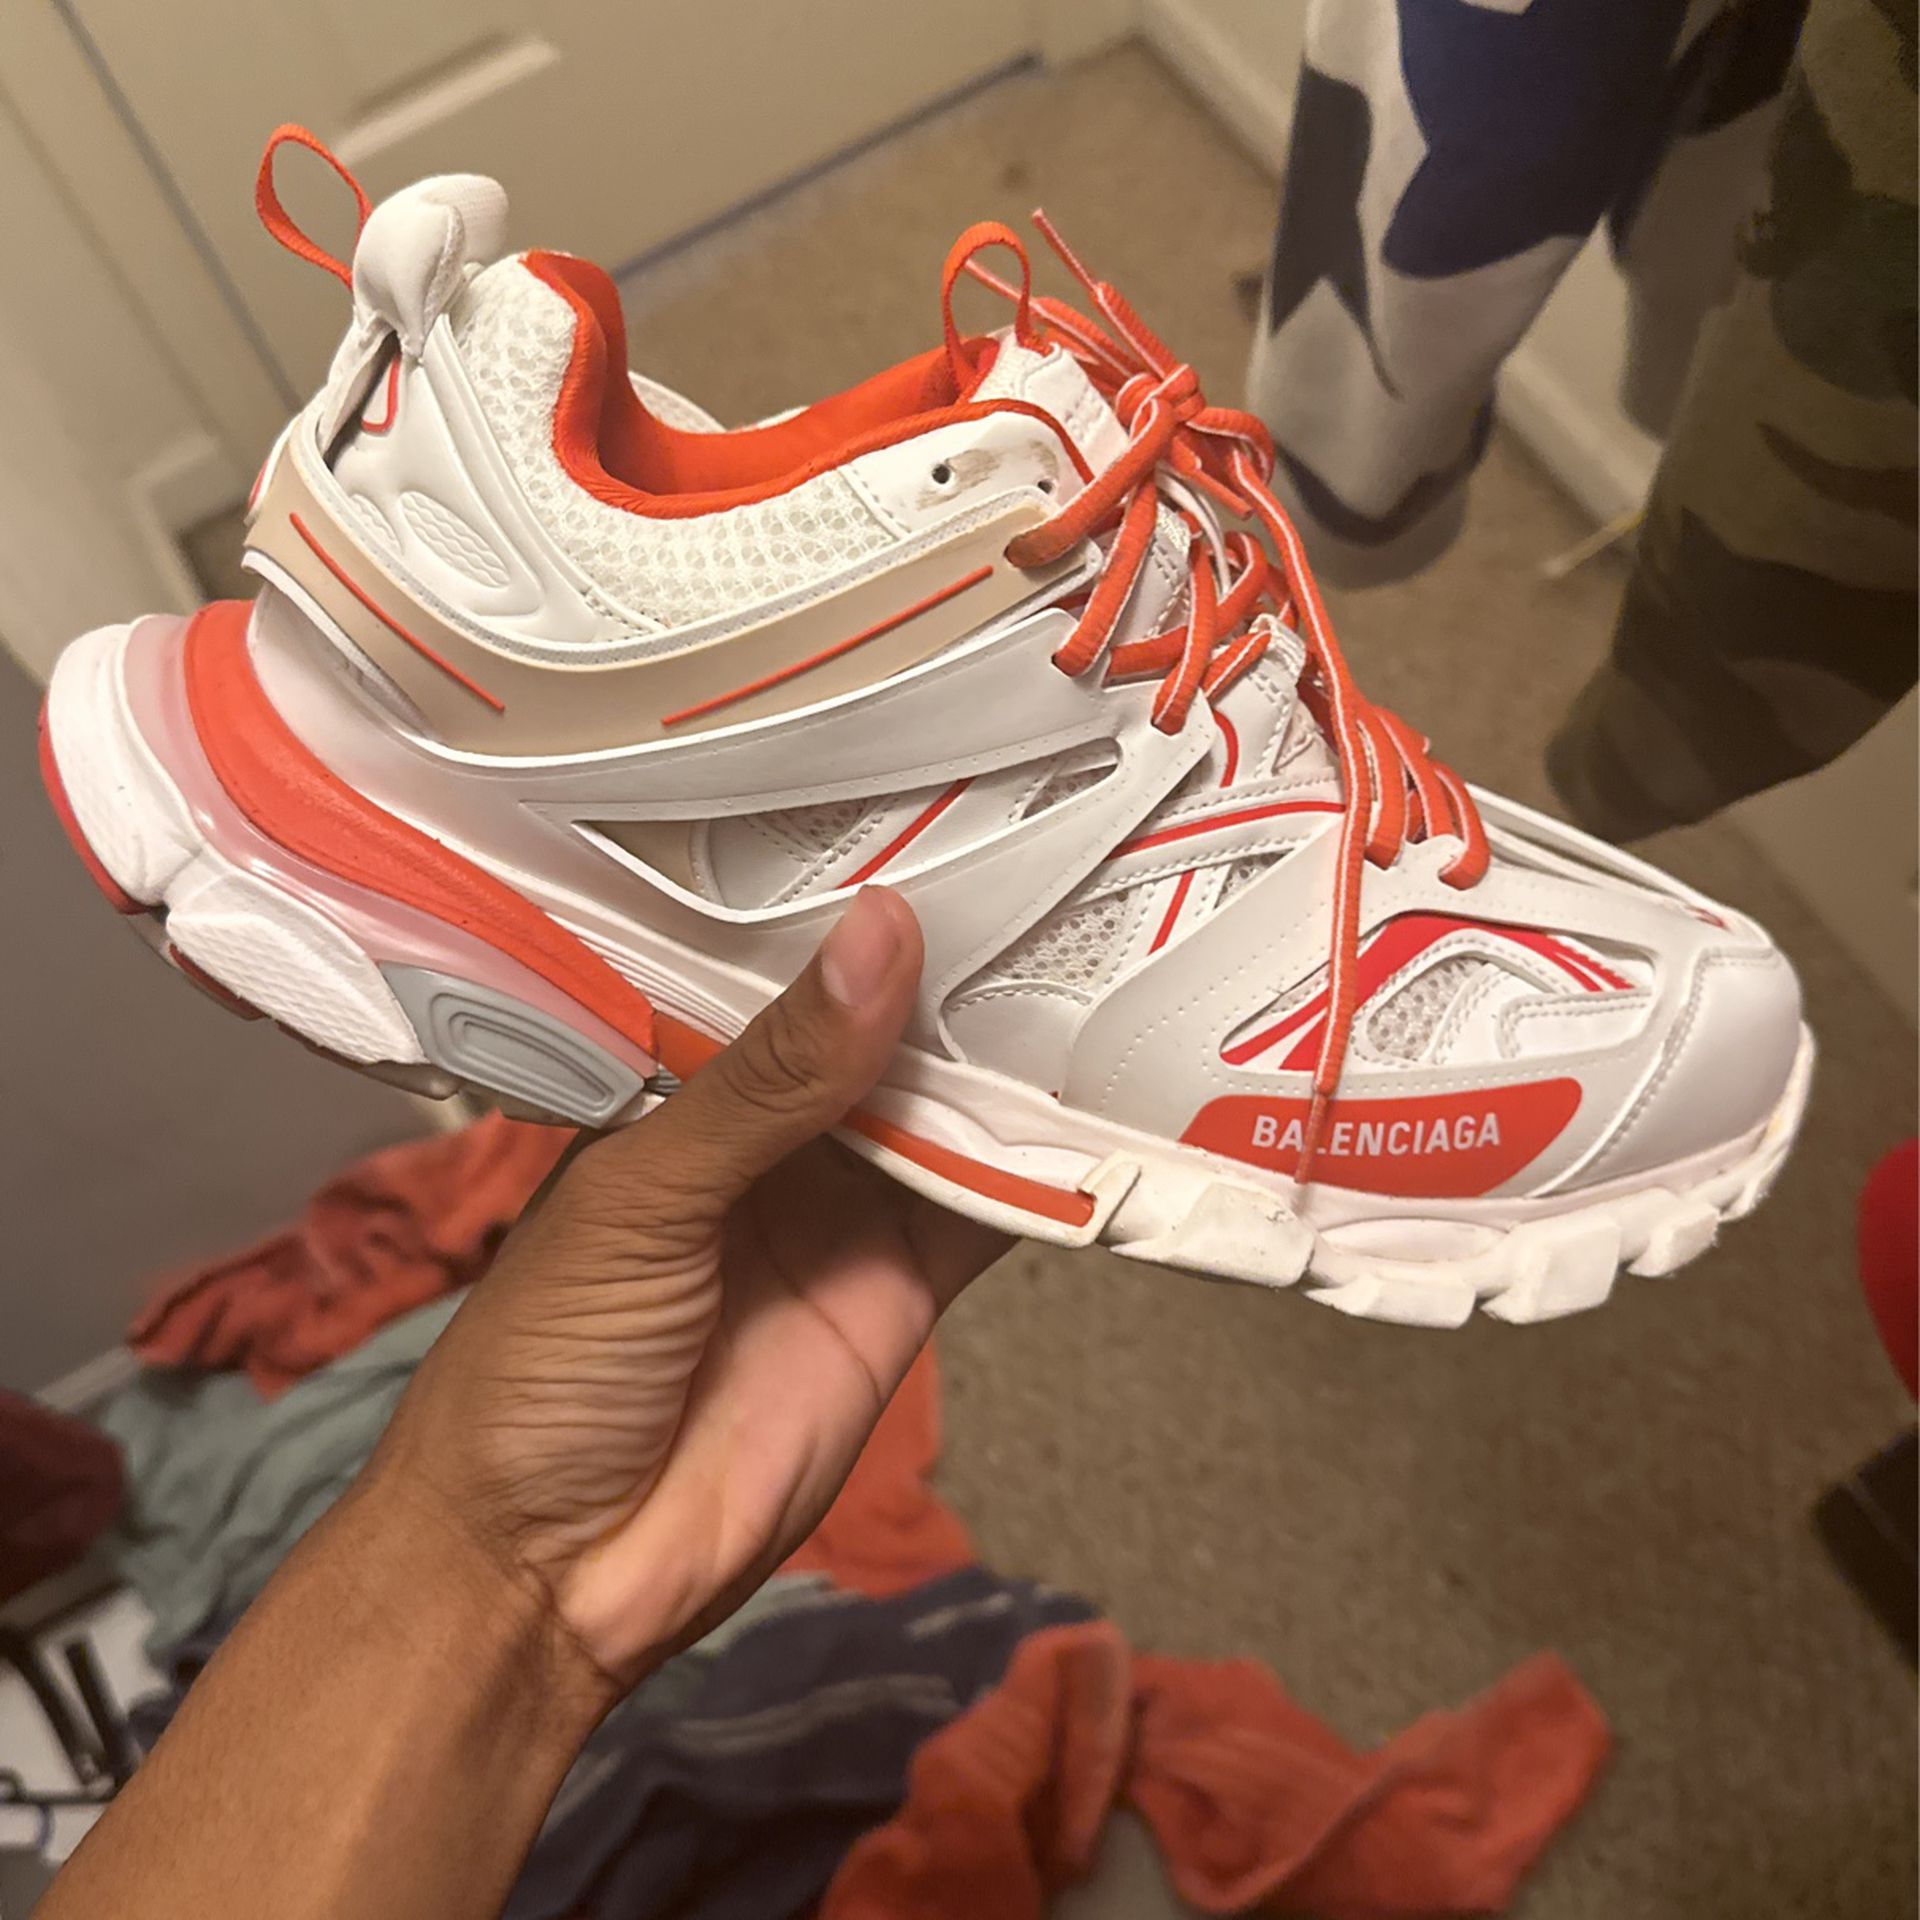 Balenciaga Red Track Runners Size 7 1/2 for Sale in Miami, FL - OfferUp